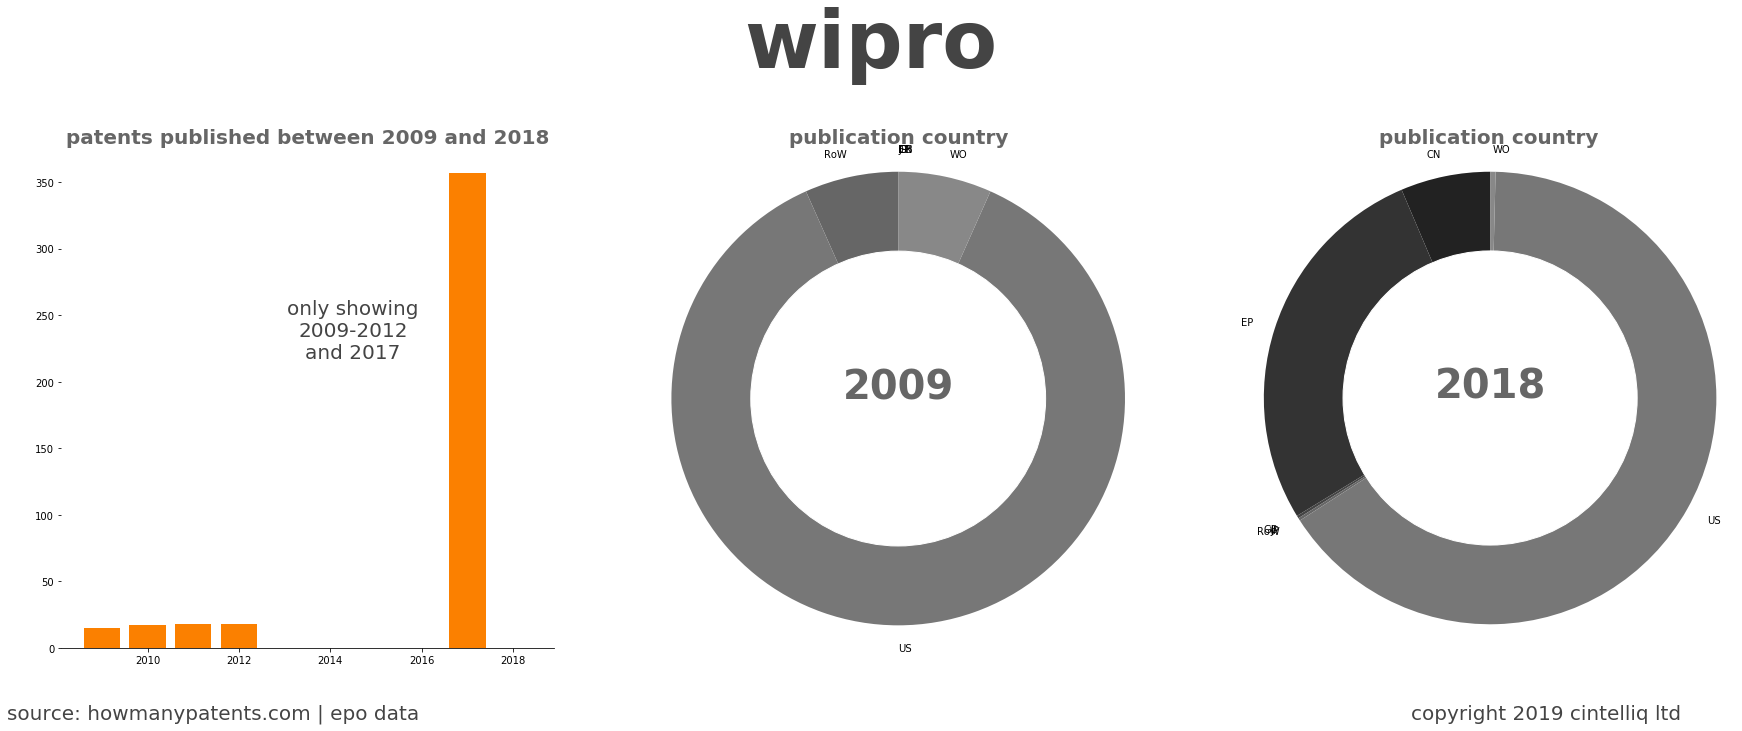 summary of patents for Wipro